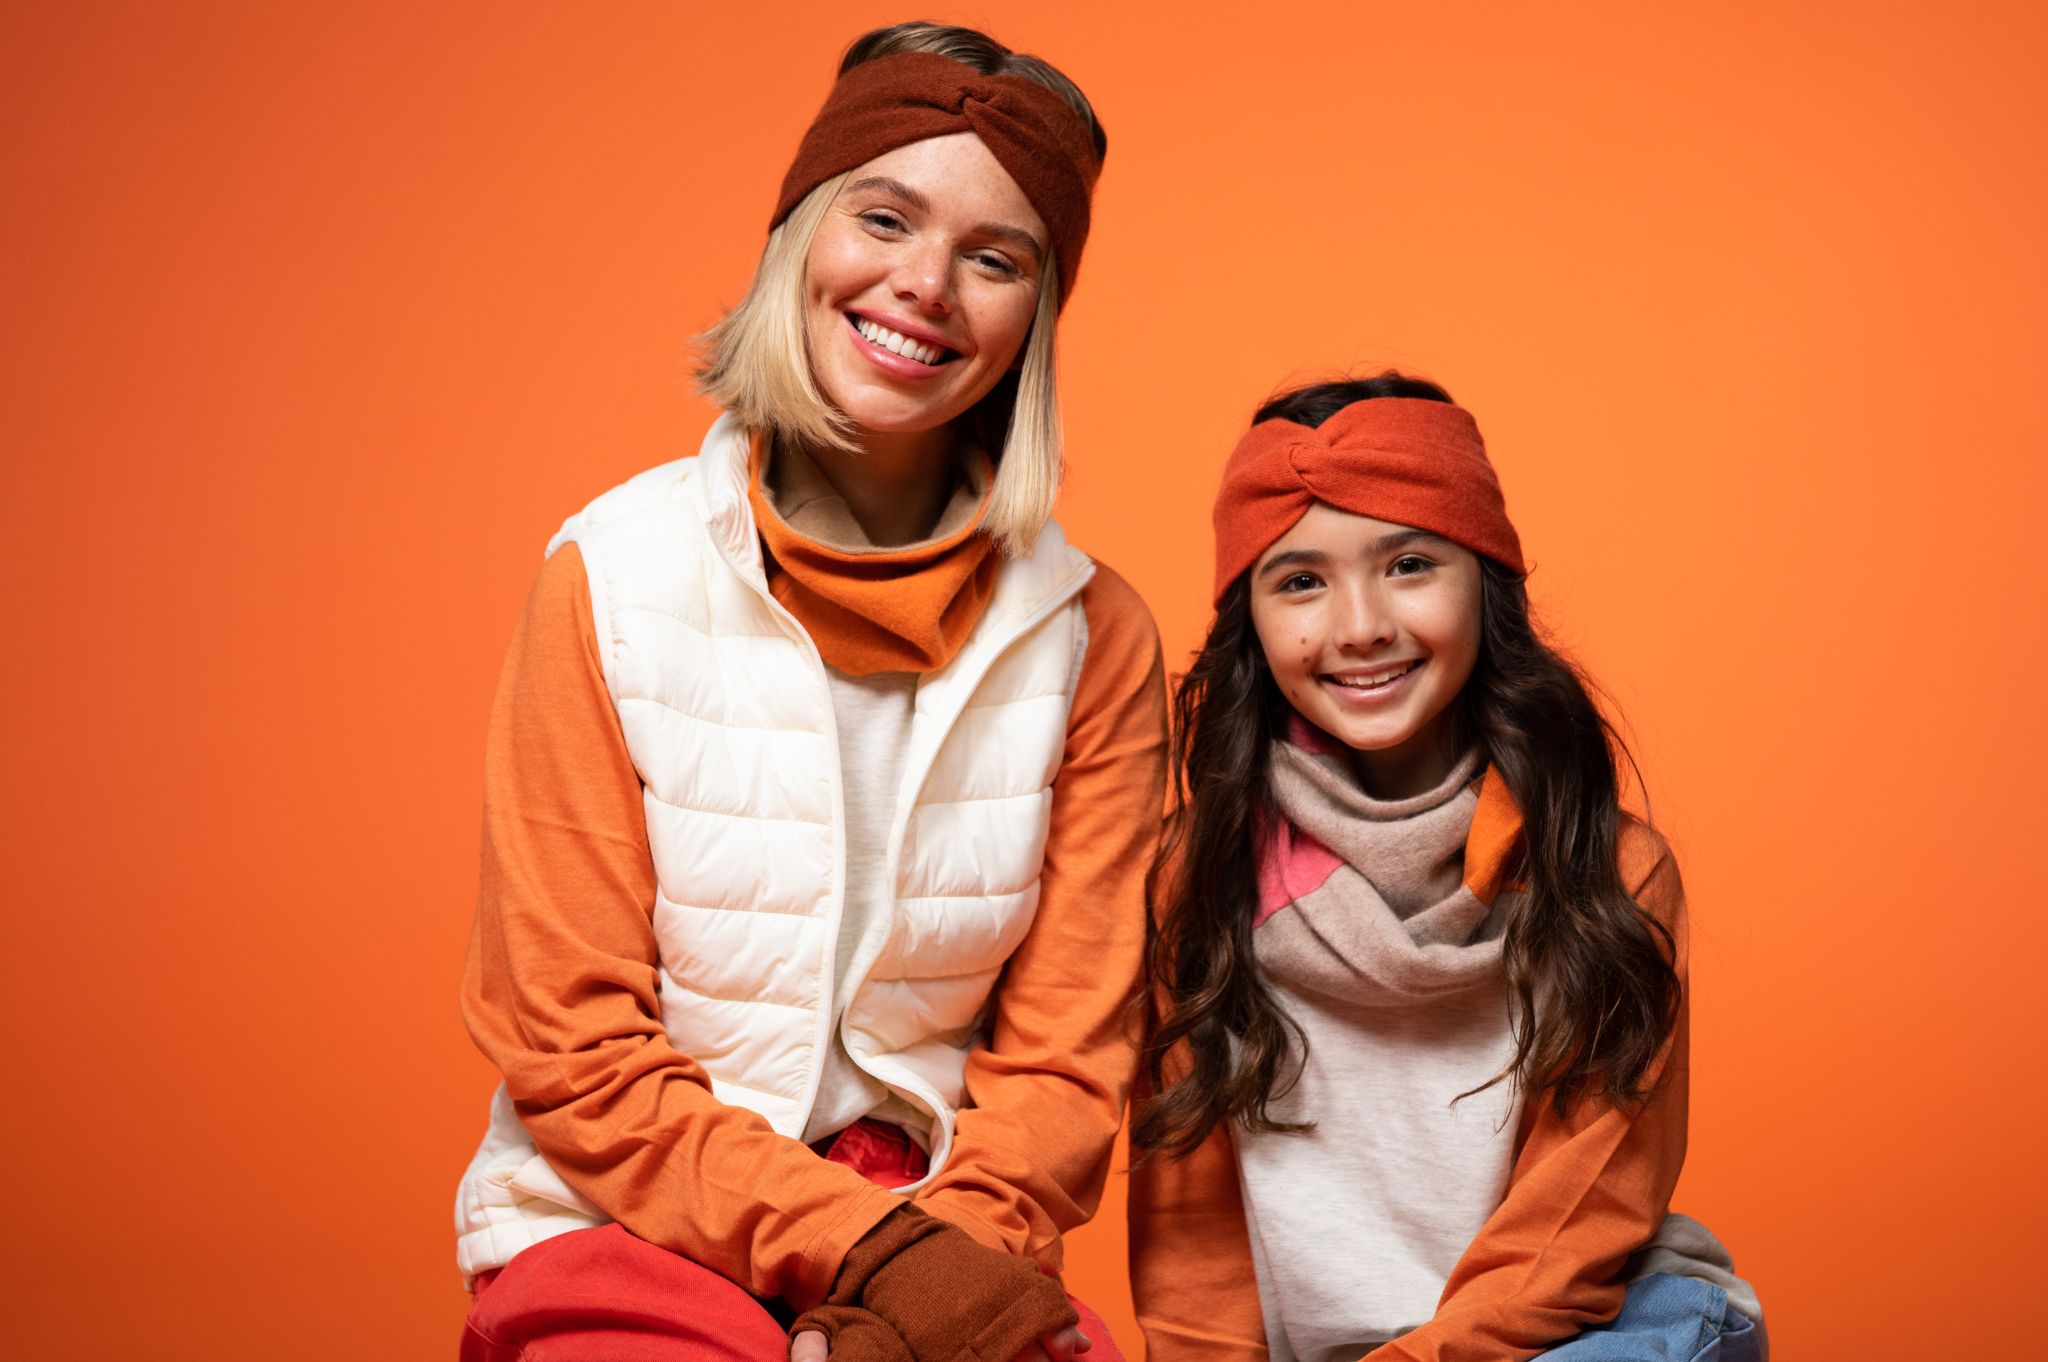 Female and girl models posing for the camera smiling against an orange backdrop